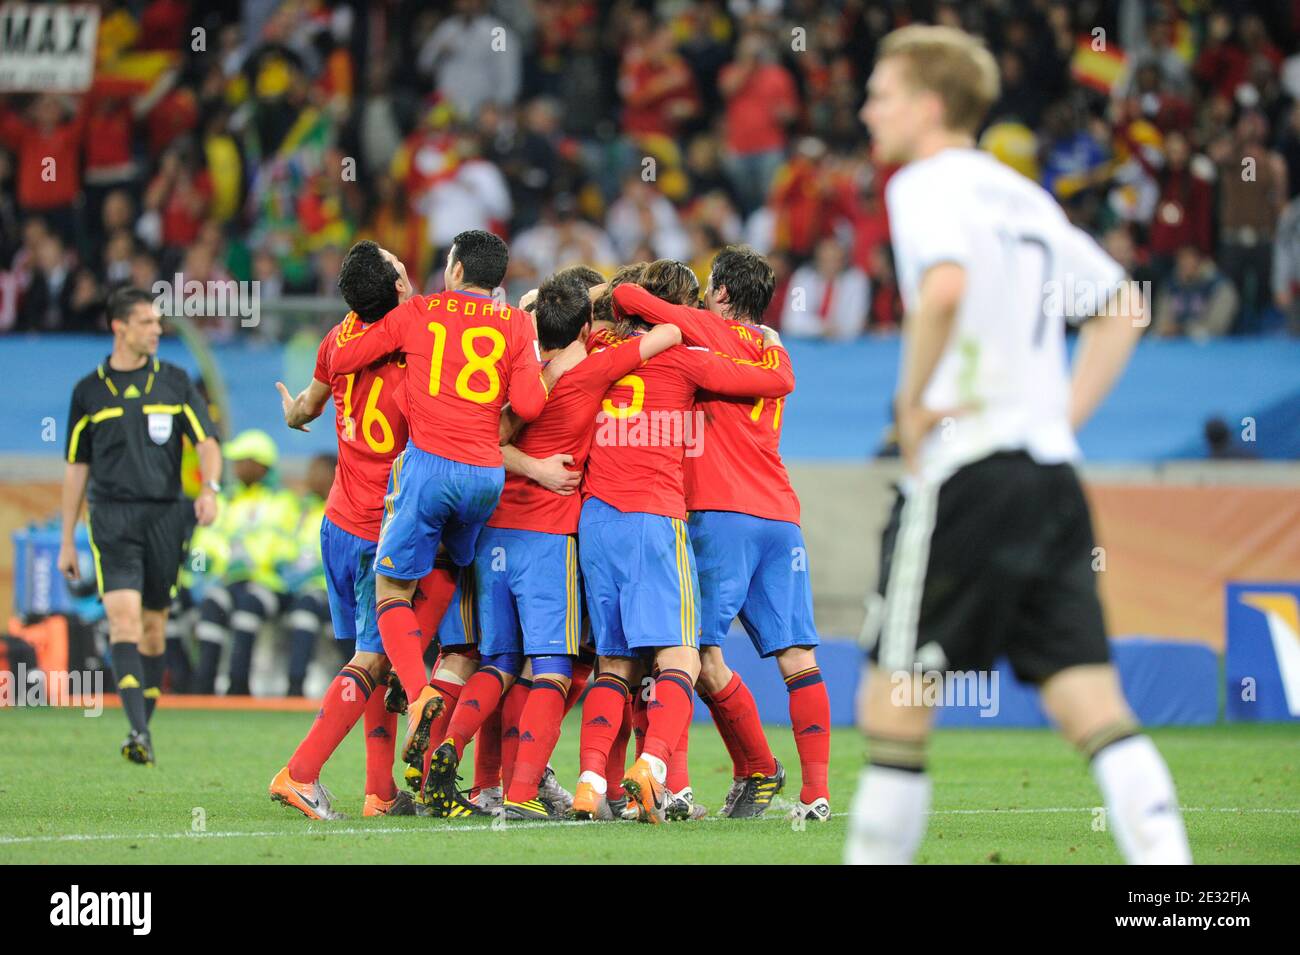 Spain's players celebrate after Carles Puyol scored the 1-0 goal during the 2010 FIFA World Cup South Africa, Semi-Final, Soccer match, Spain vs Germany at Moses Mabhida football stadium in Durban, South Africa on July 7th, 2010. Spain won 1-0. Photo by Henri Szwarc/ABACAPRESS.COM Stock Photo